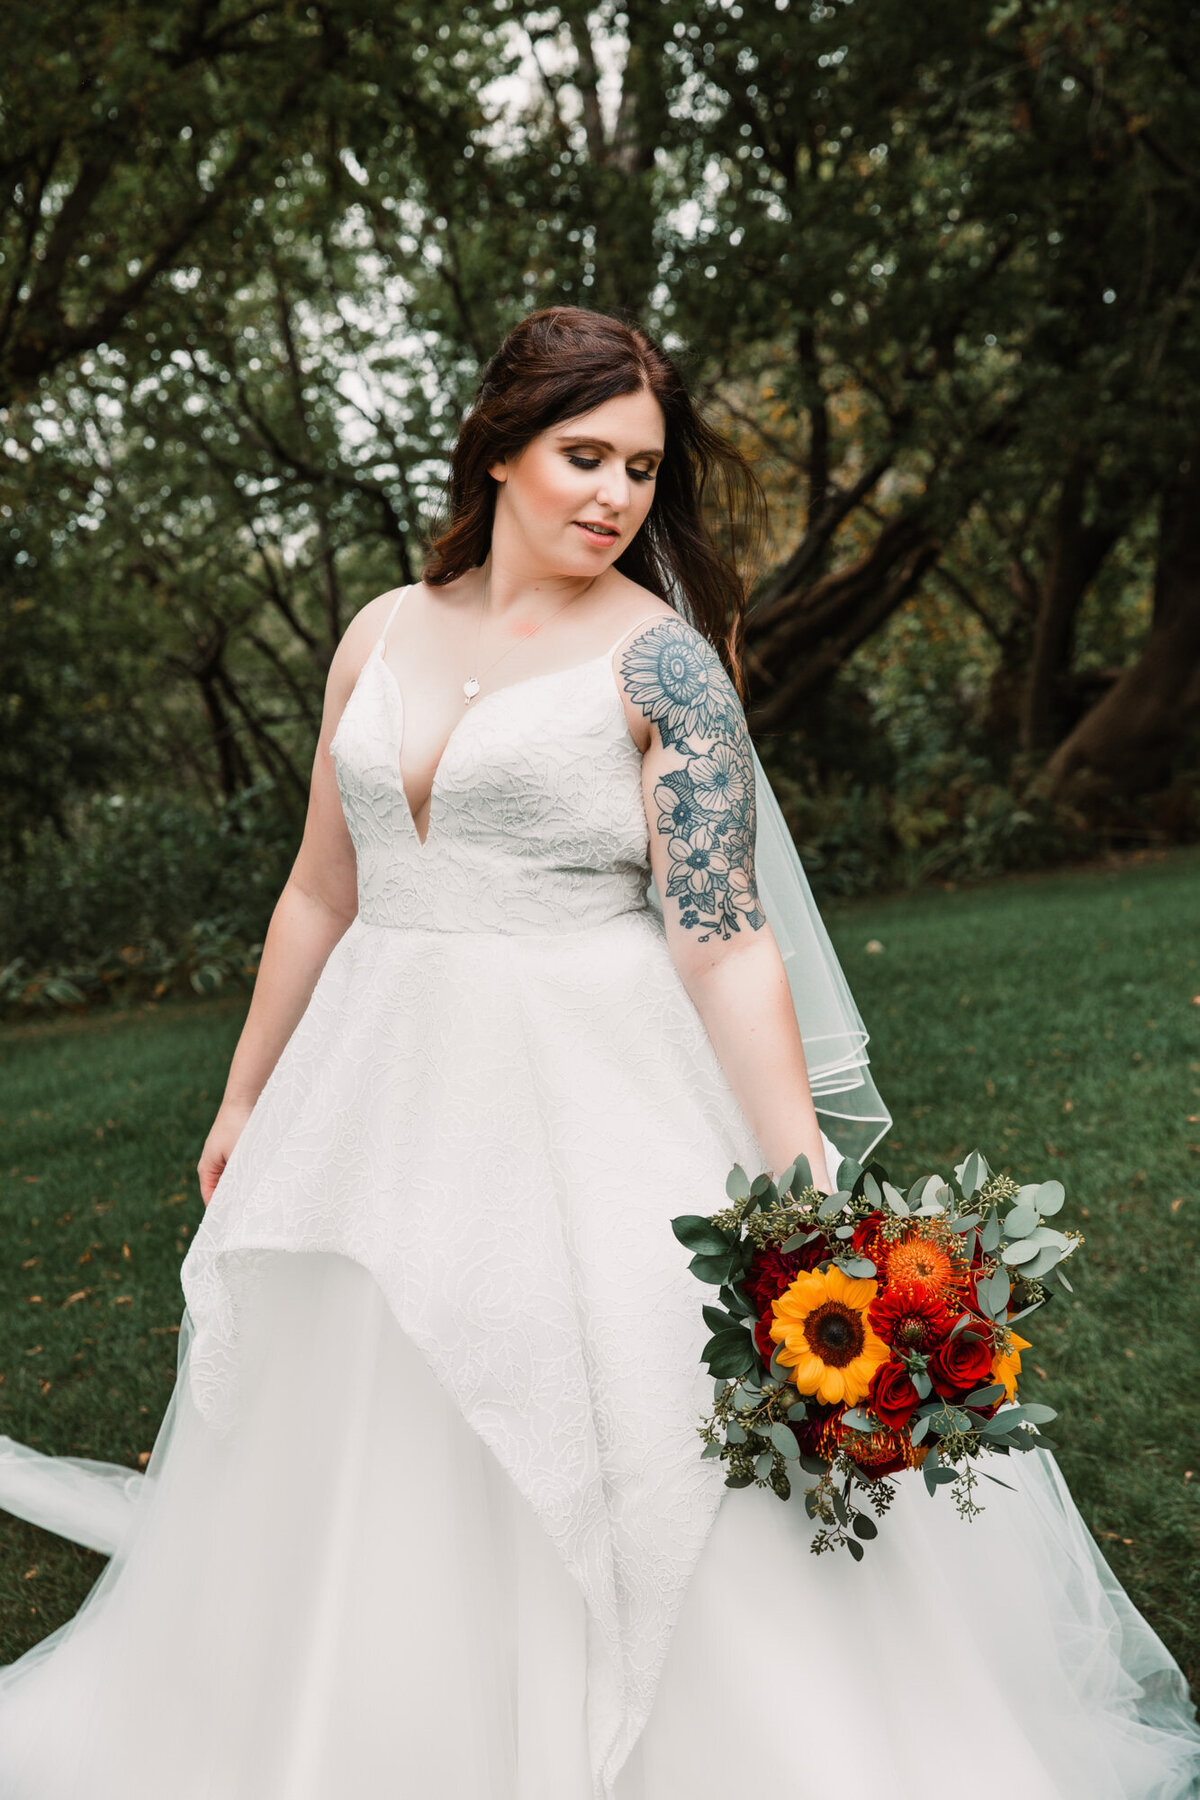 bride poses with flowers at her side and her ball gown dress